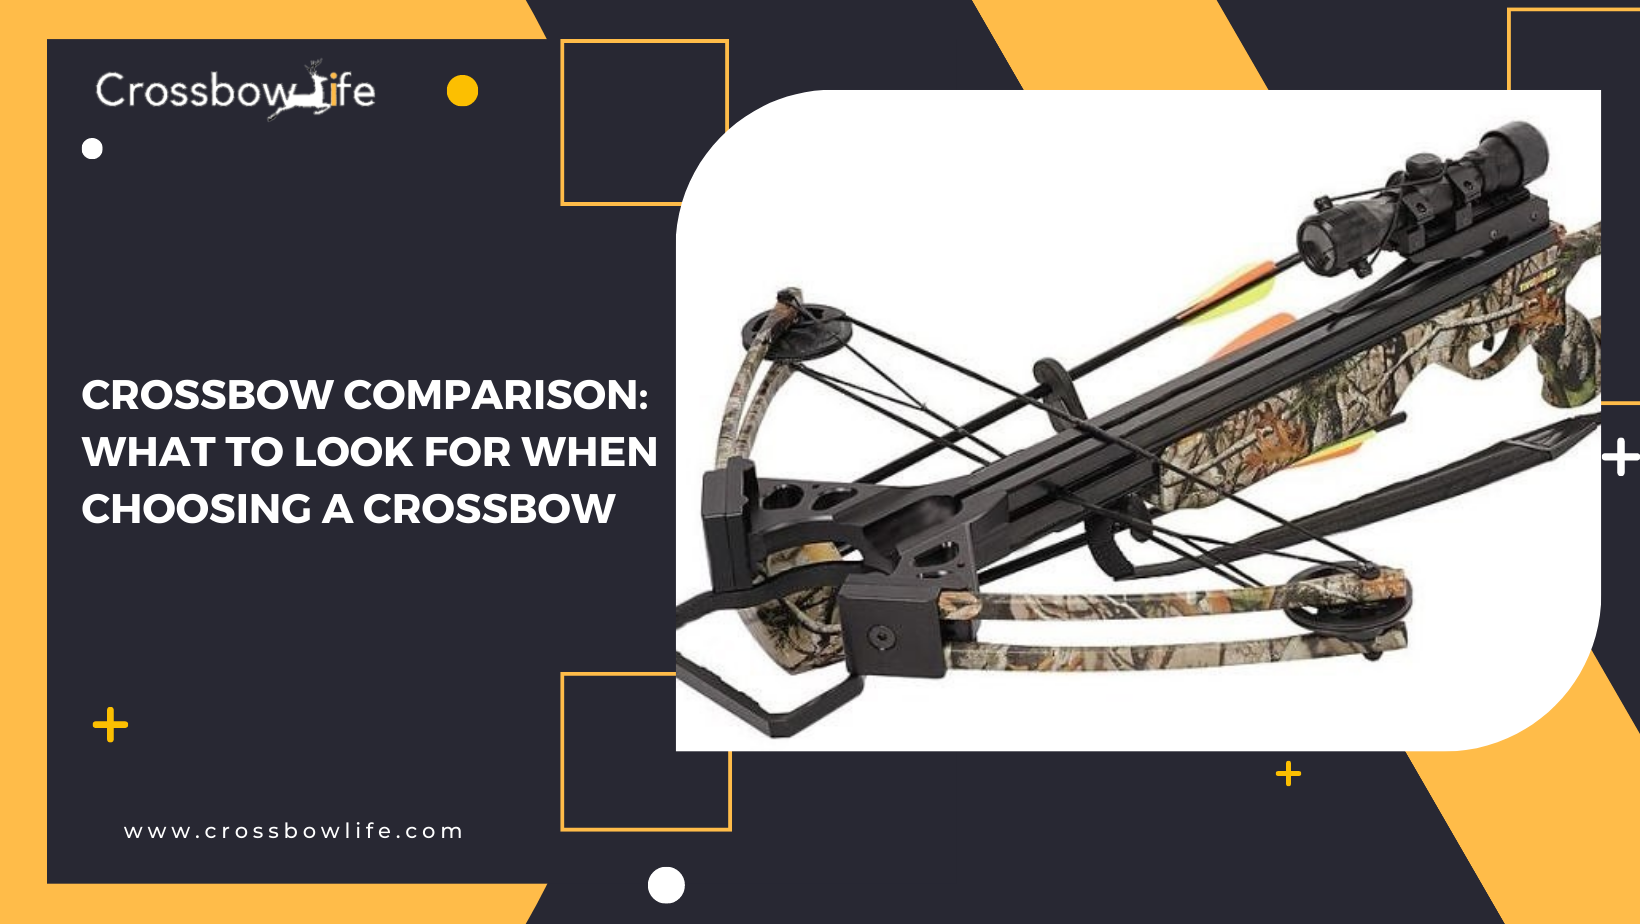 Crossbow Comparison: What to Look for When Choosing a Crossbow